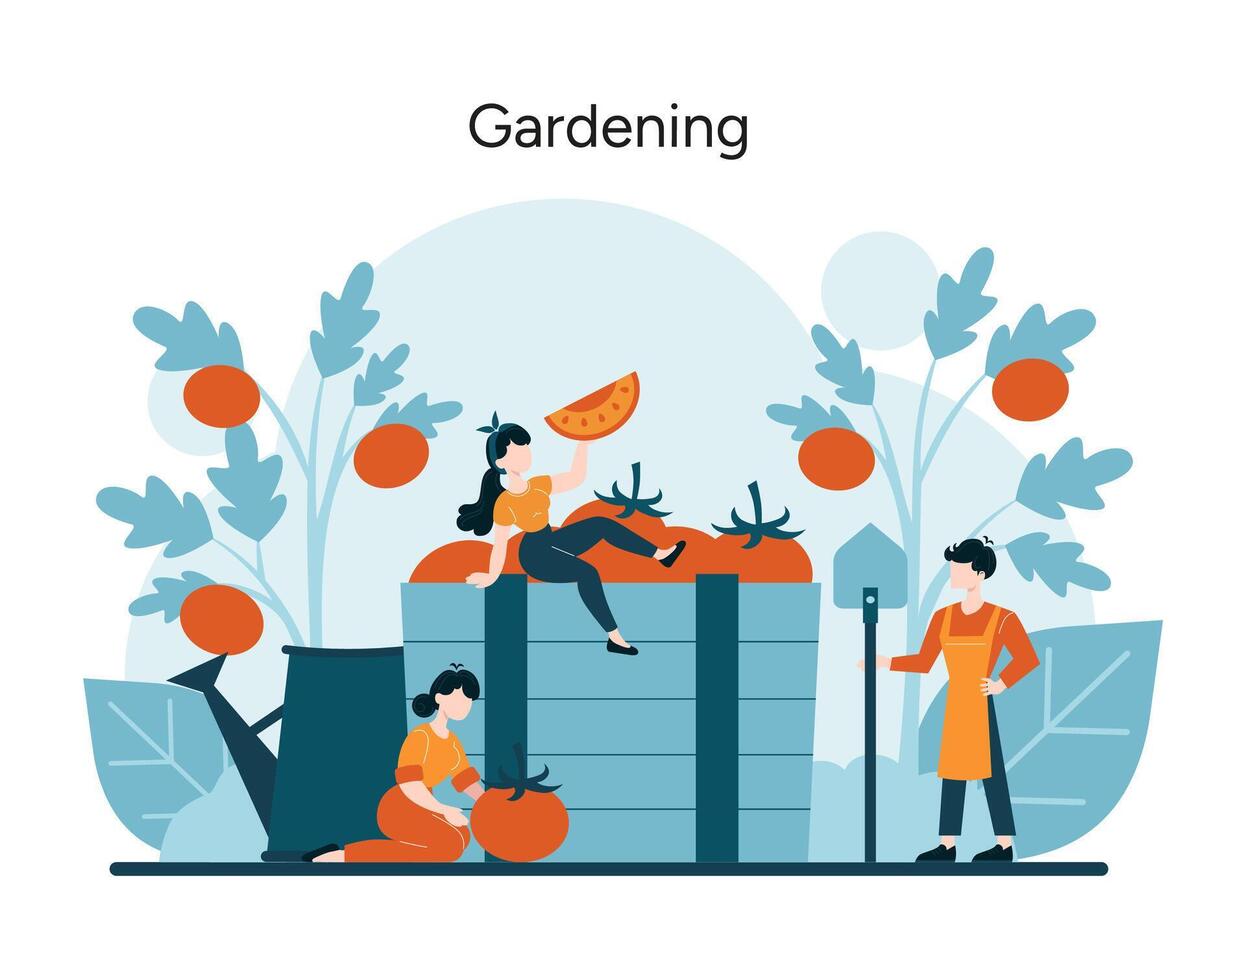 Joyful individuals tend to their garden, showcasing the serene pleasure of nurturing plants and the beauty of homegrown produce vector